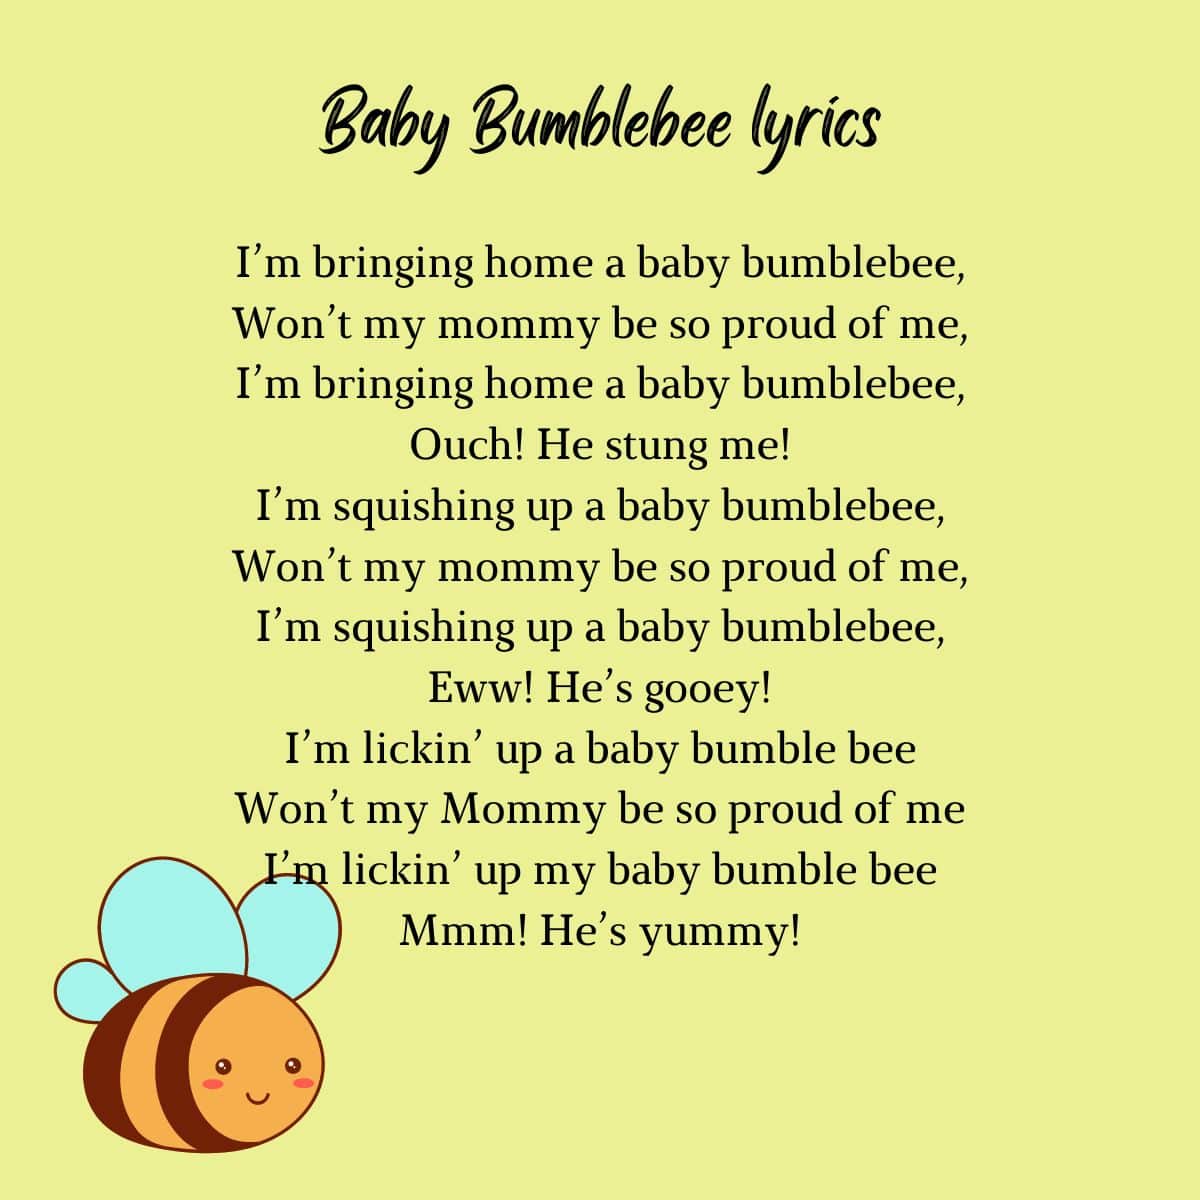 Baby Bumblebee Lyrics on a light yellow-green background wit a Bee on it